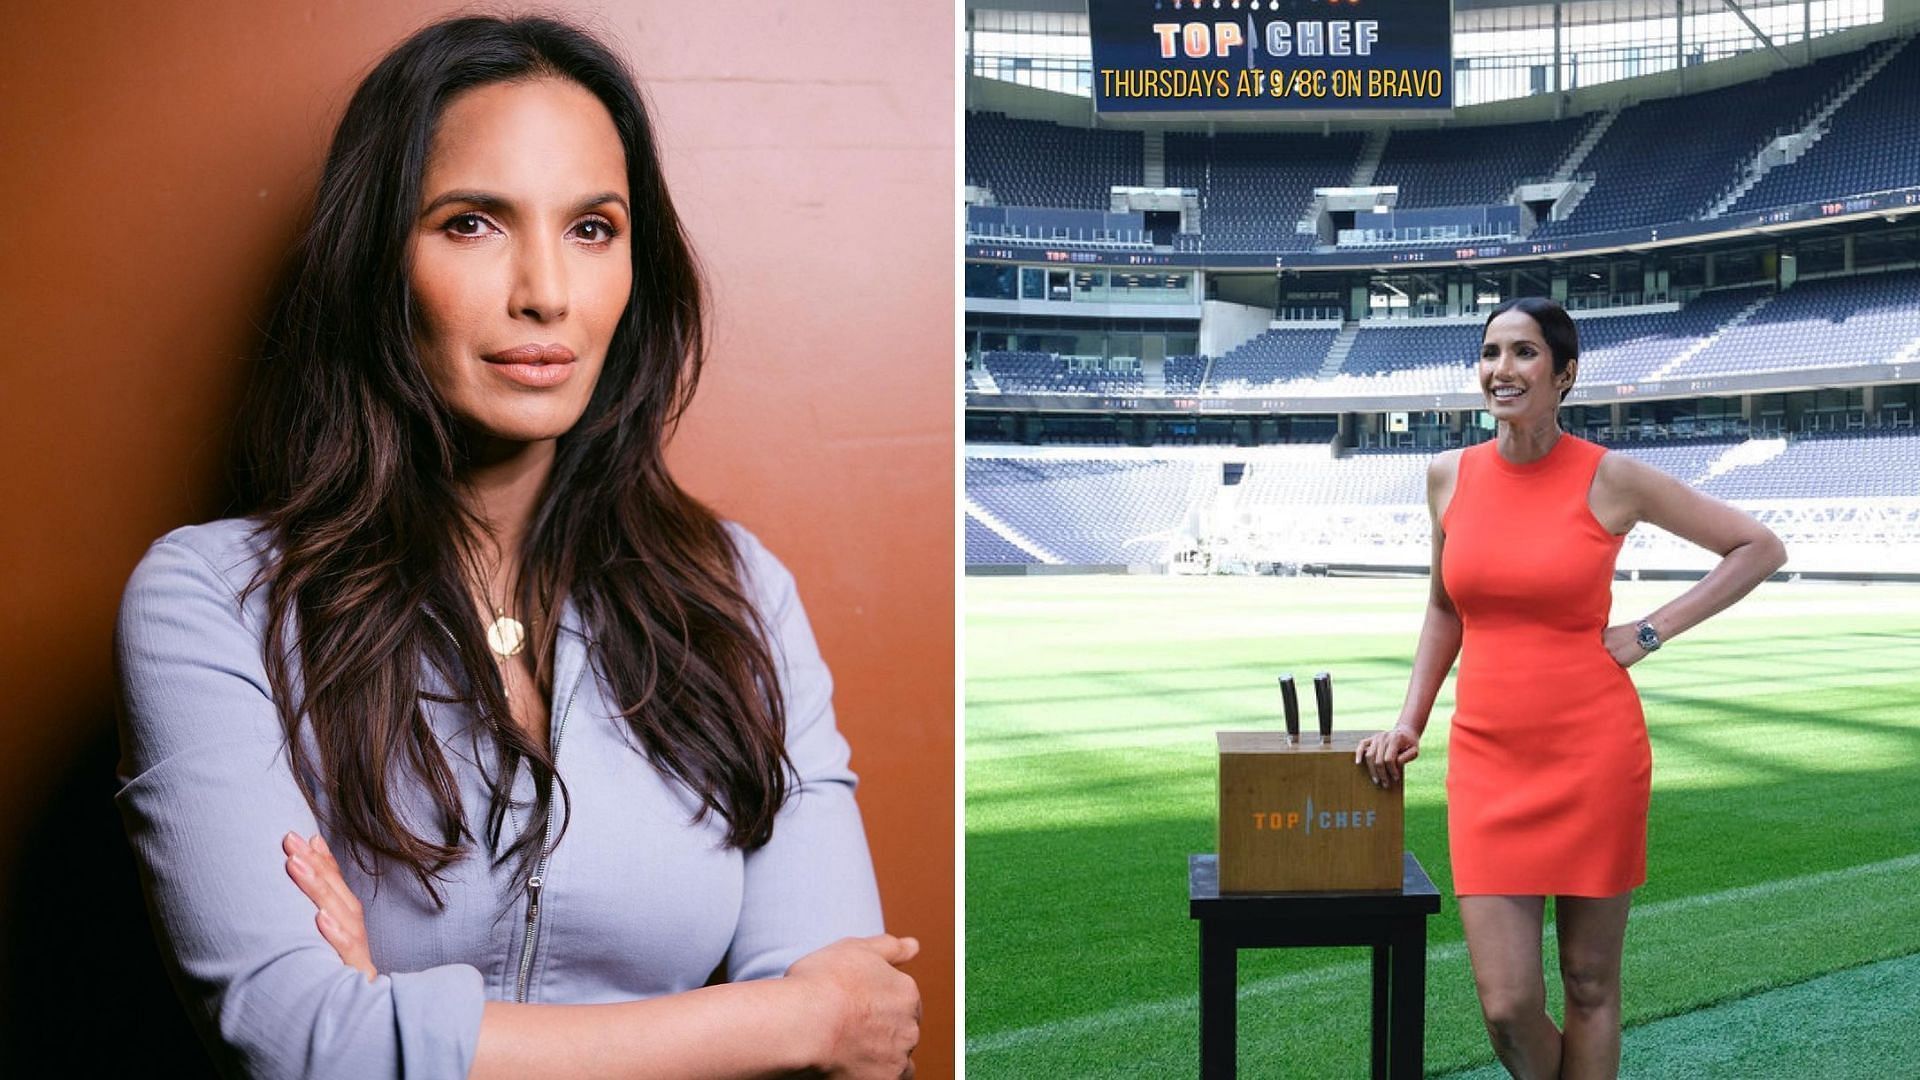 Padma Lakshmi appears on her final Top Chef episode